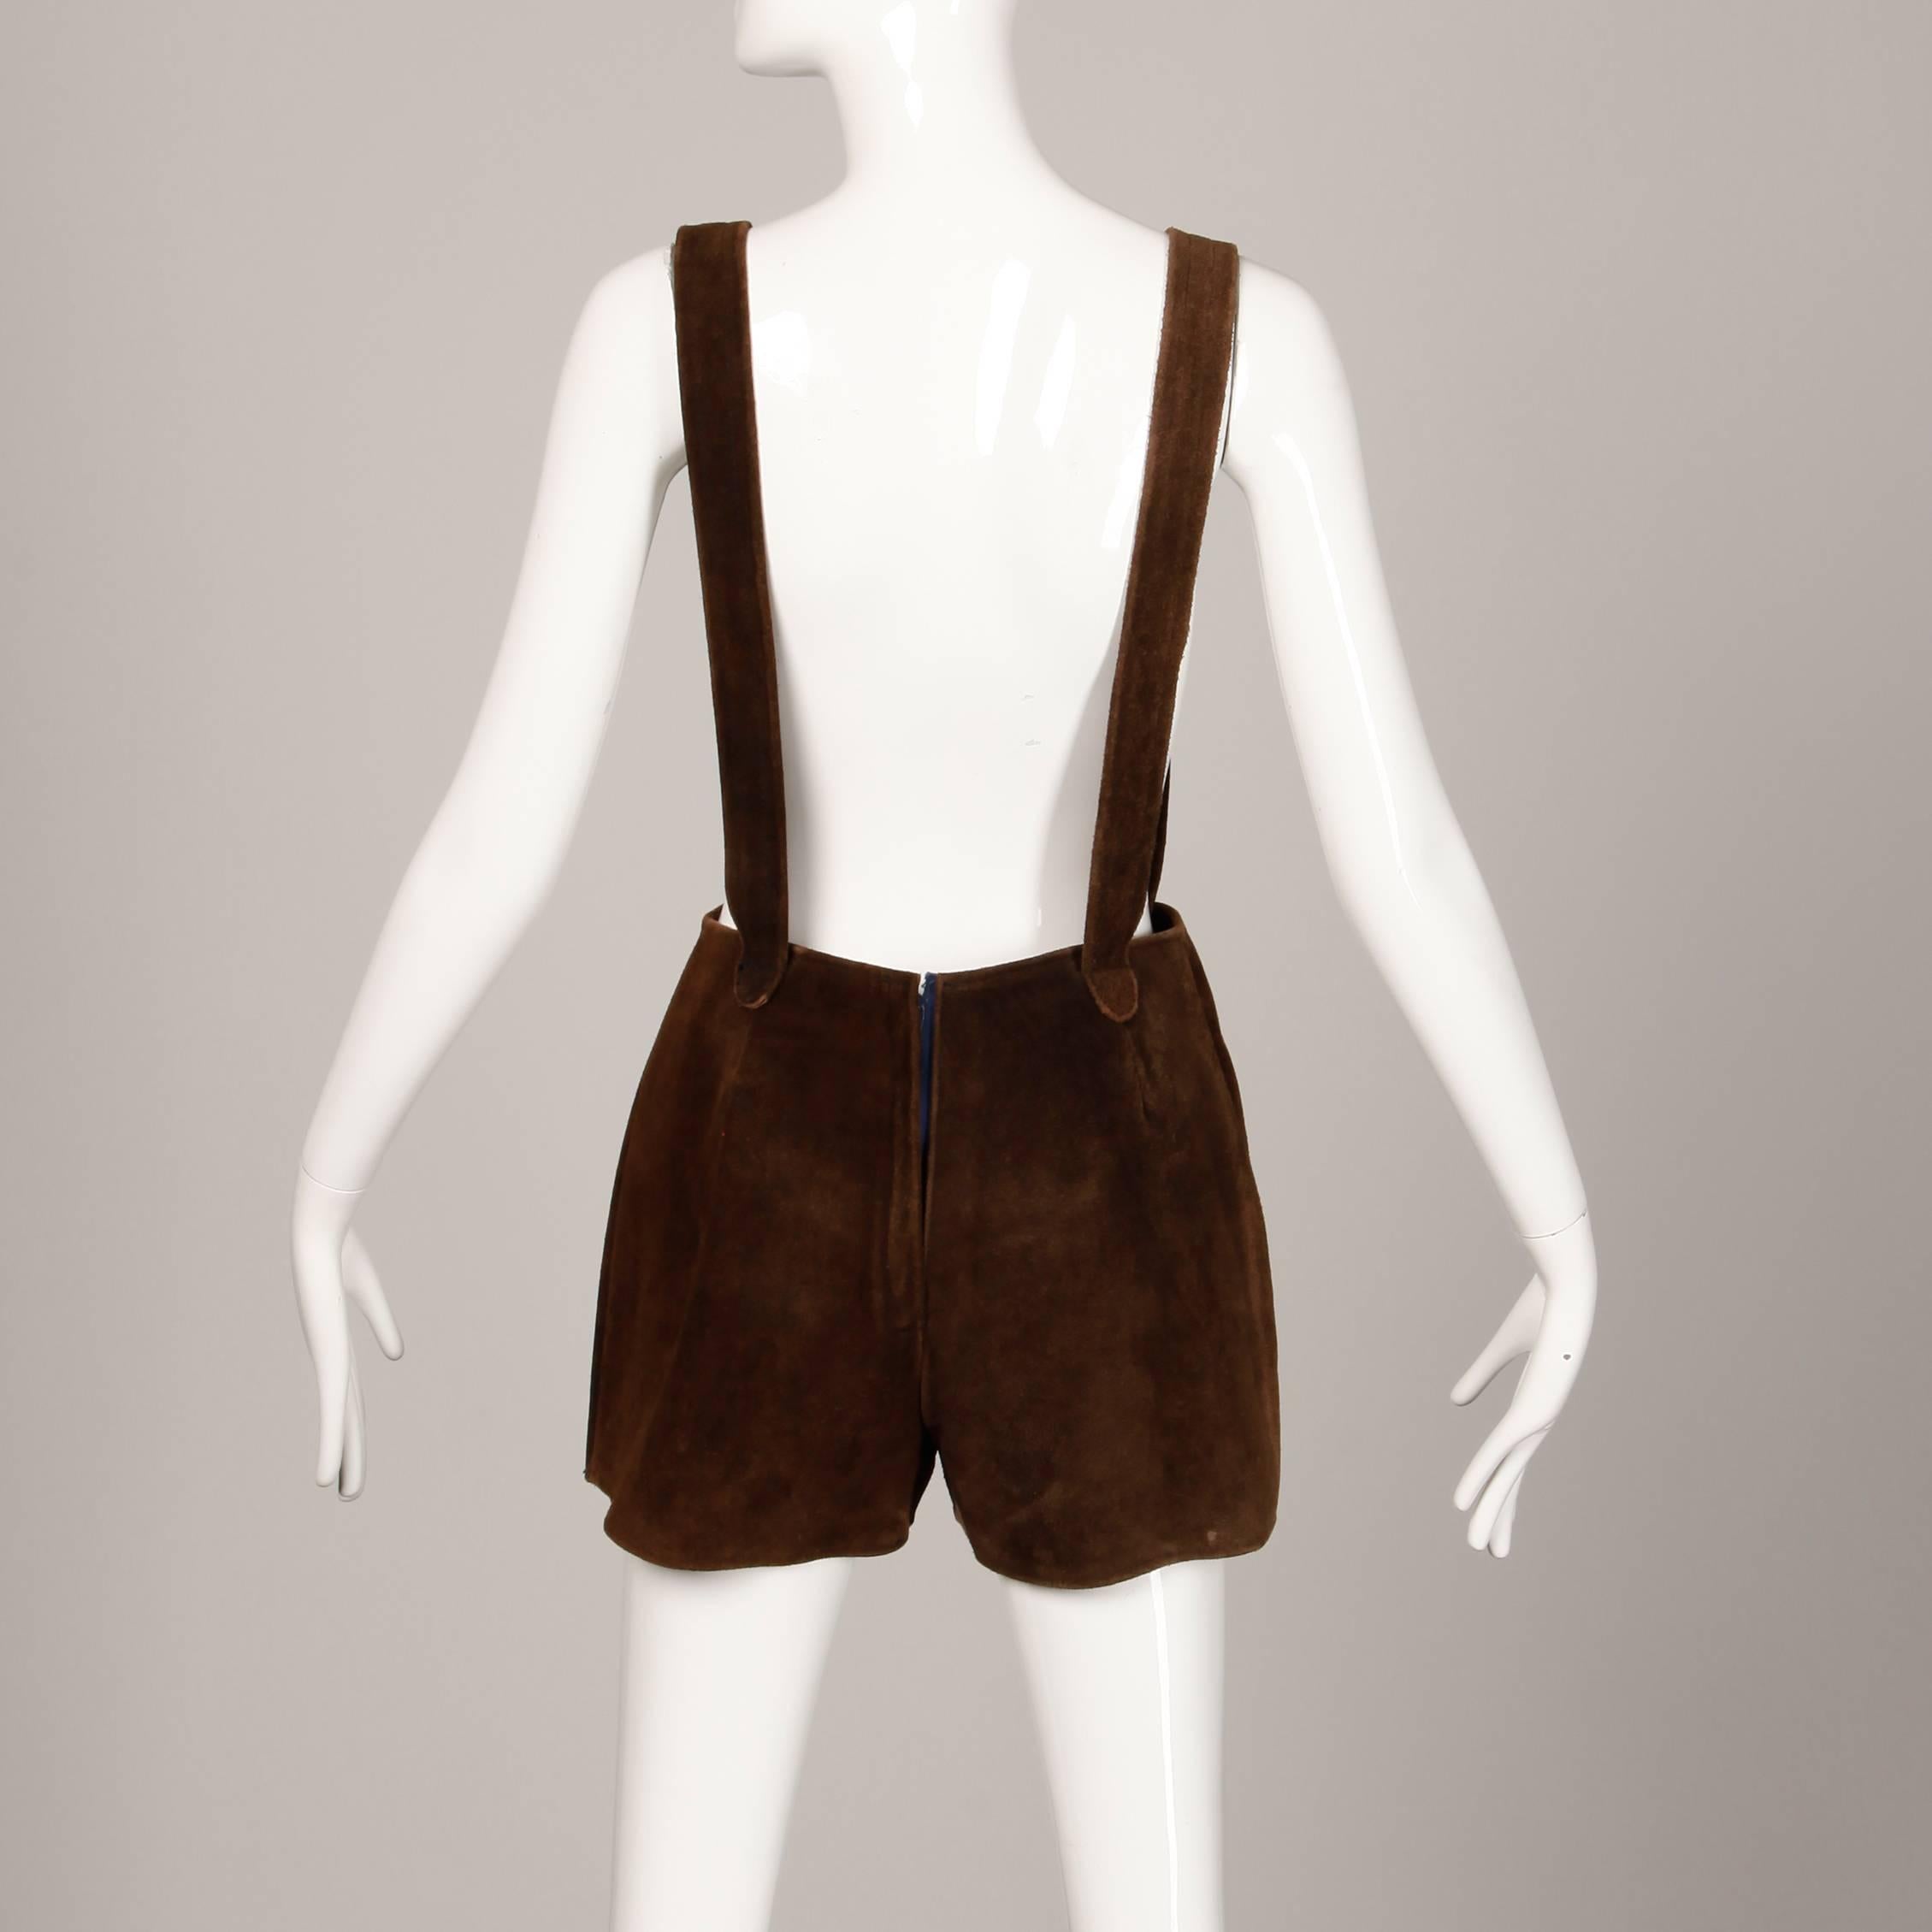 Women's 1970s Vintage Two-Tone Brown Suede Leather Shorts Overalls Onesie